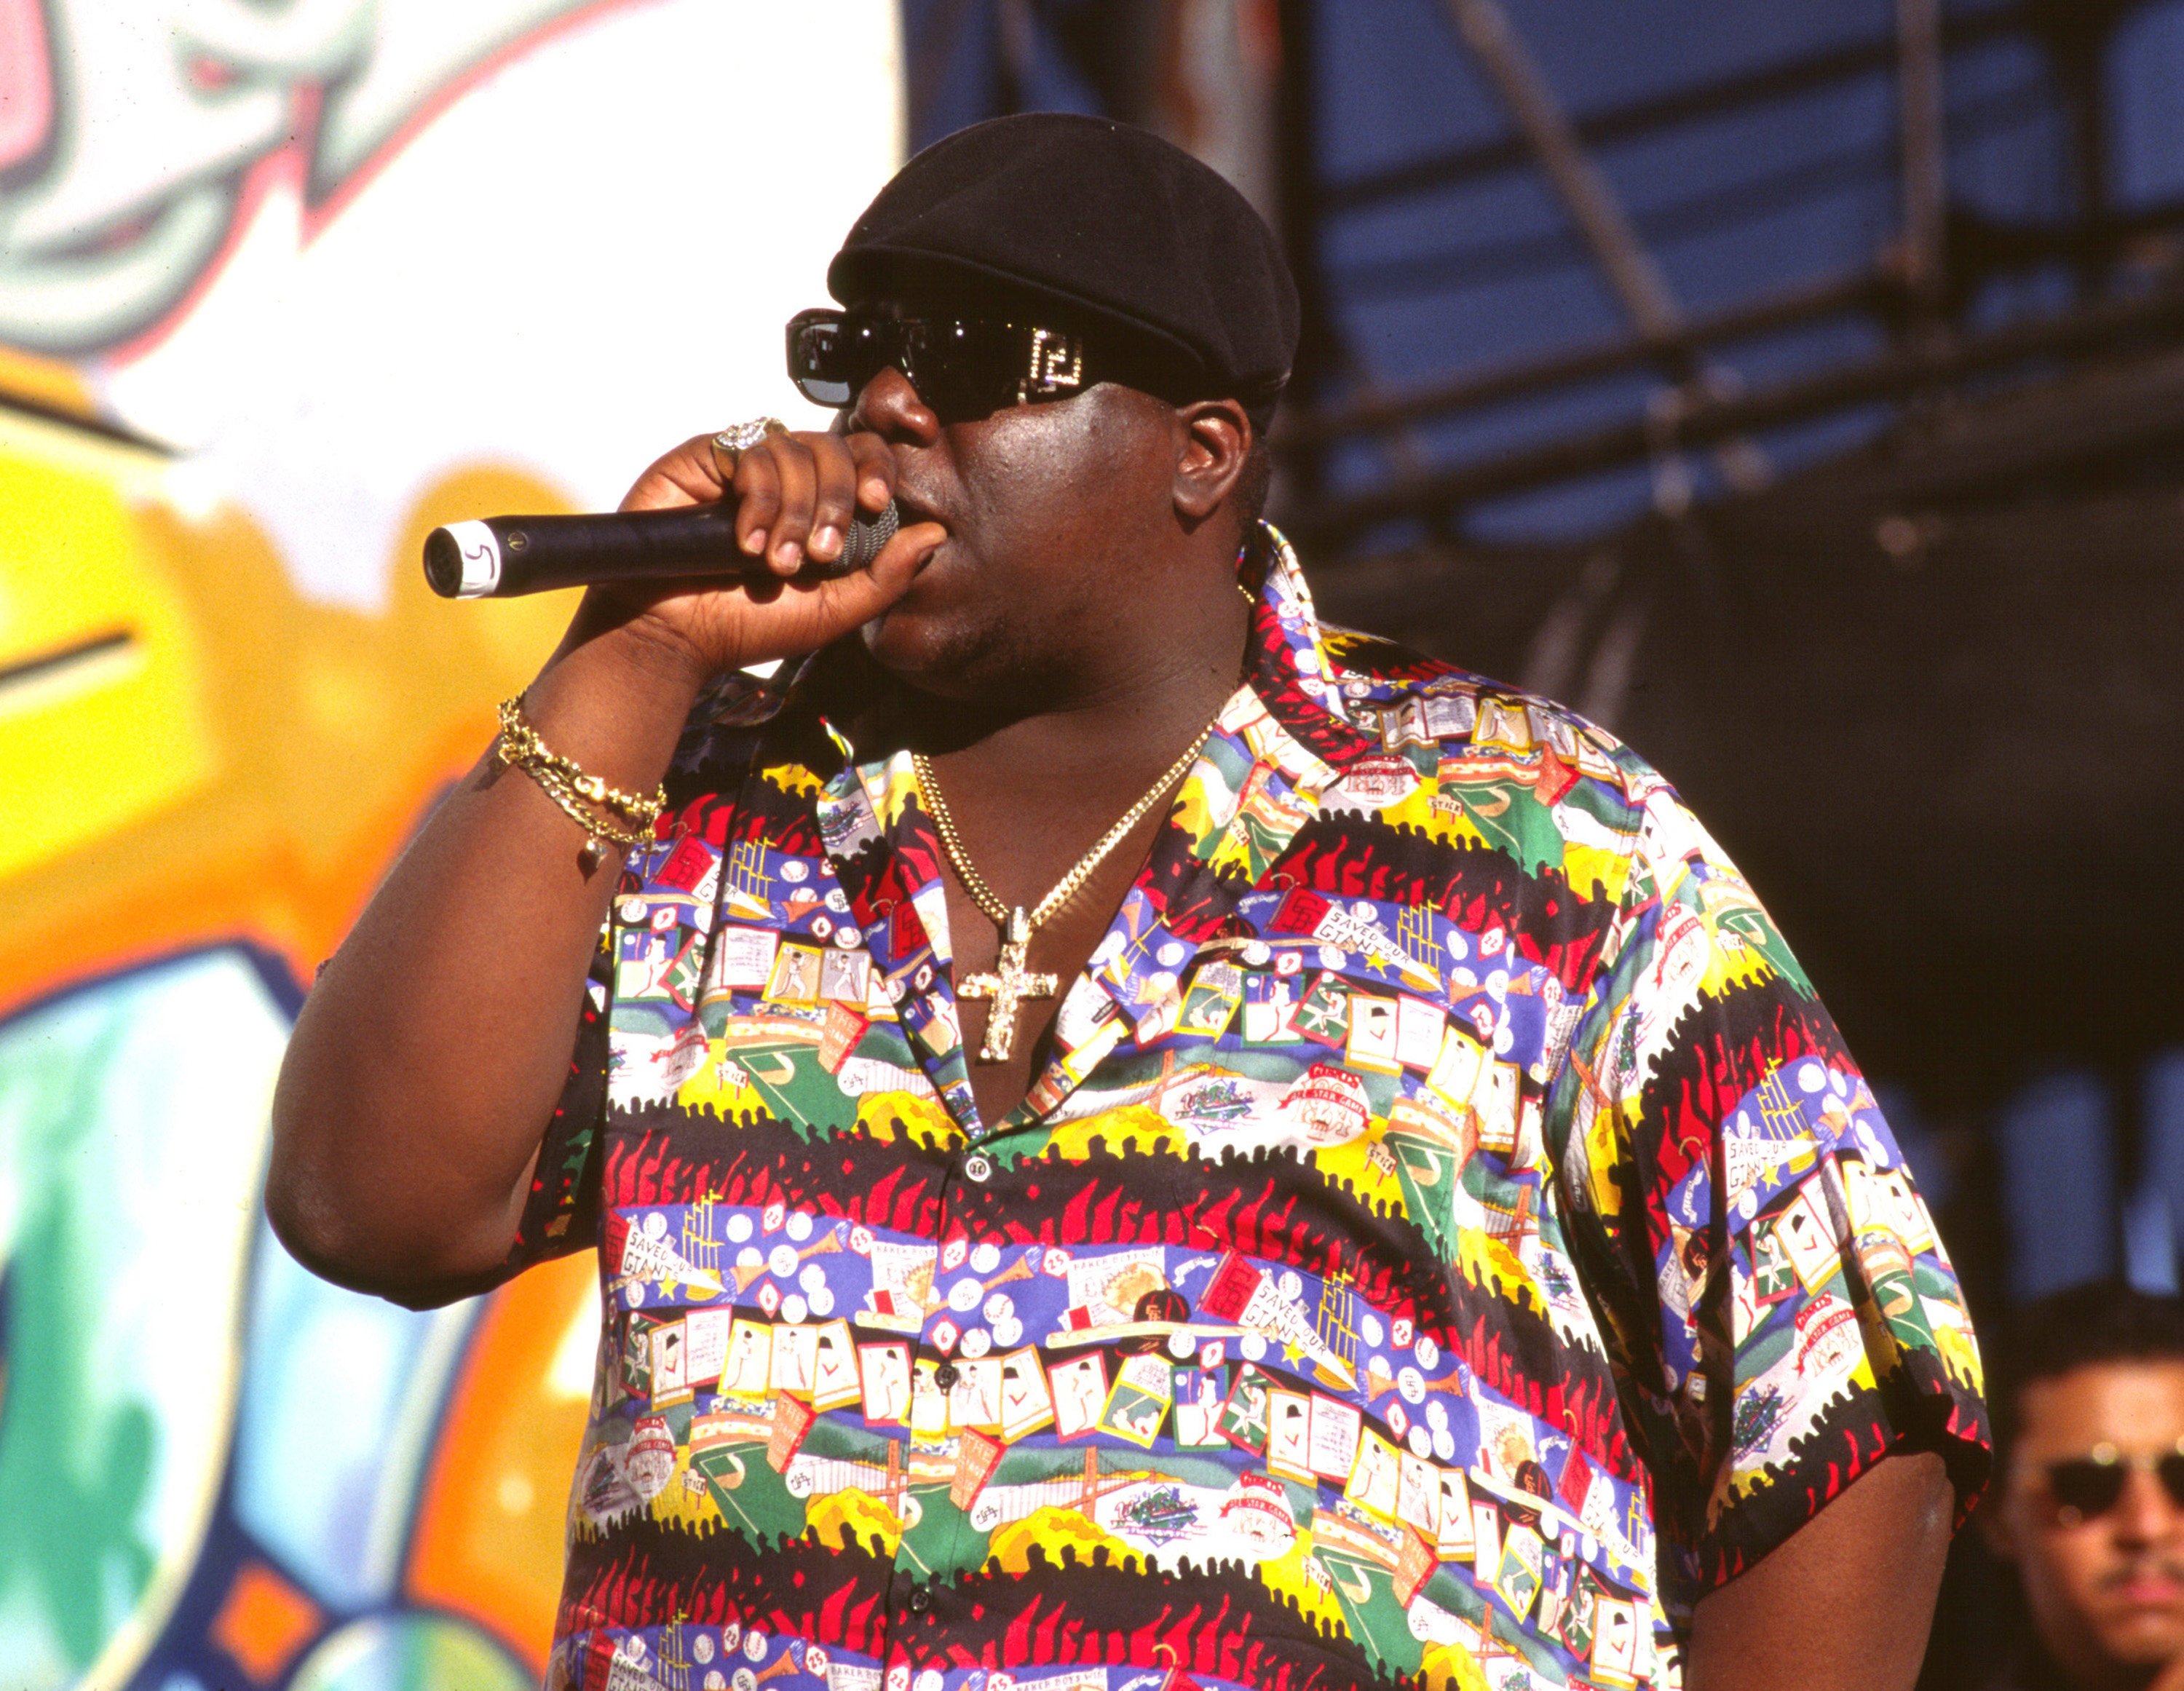 The Notorious B.I.G., rapper behind 'One More Chance', on stage performing